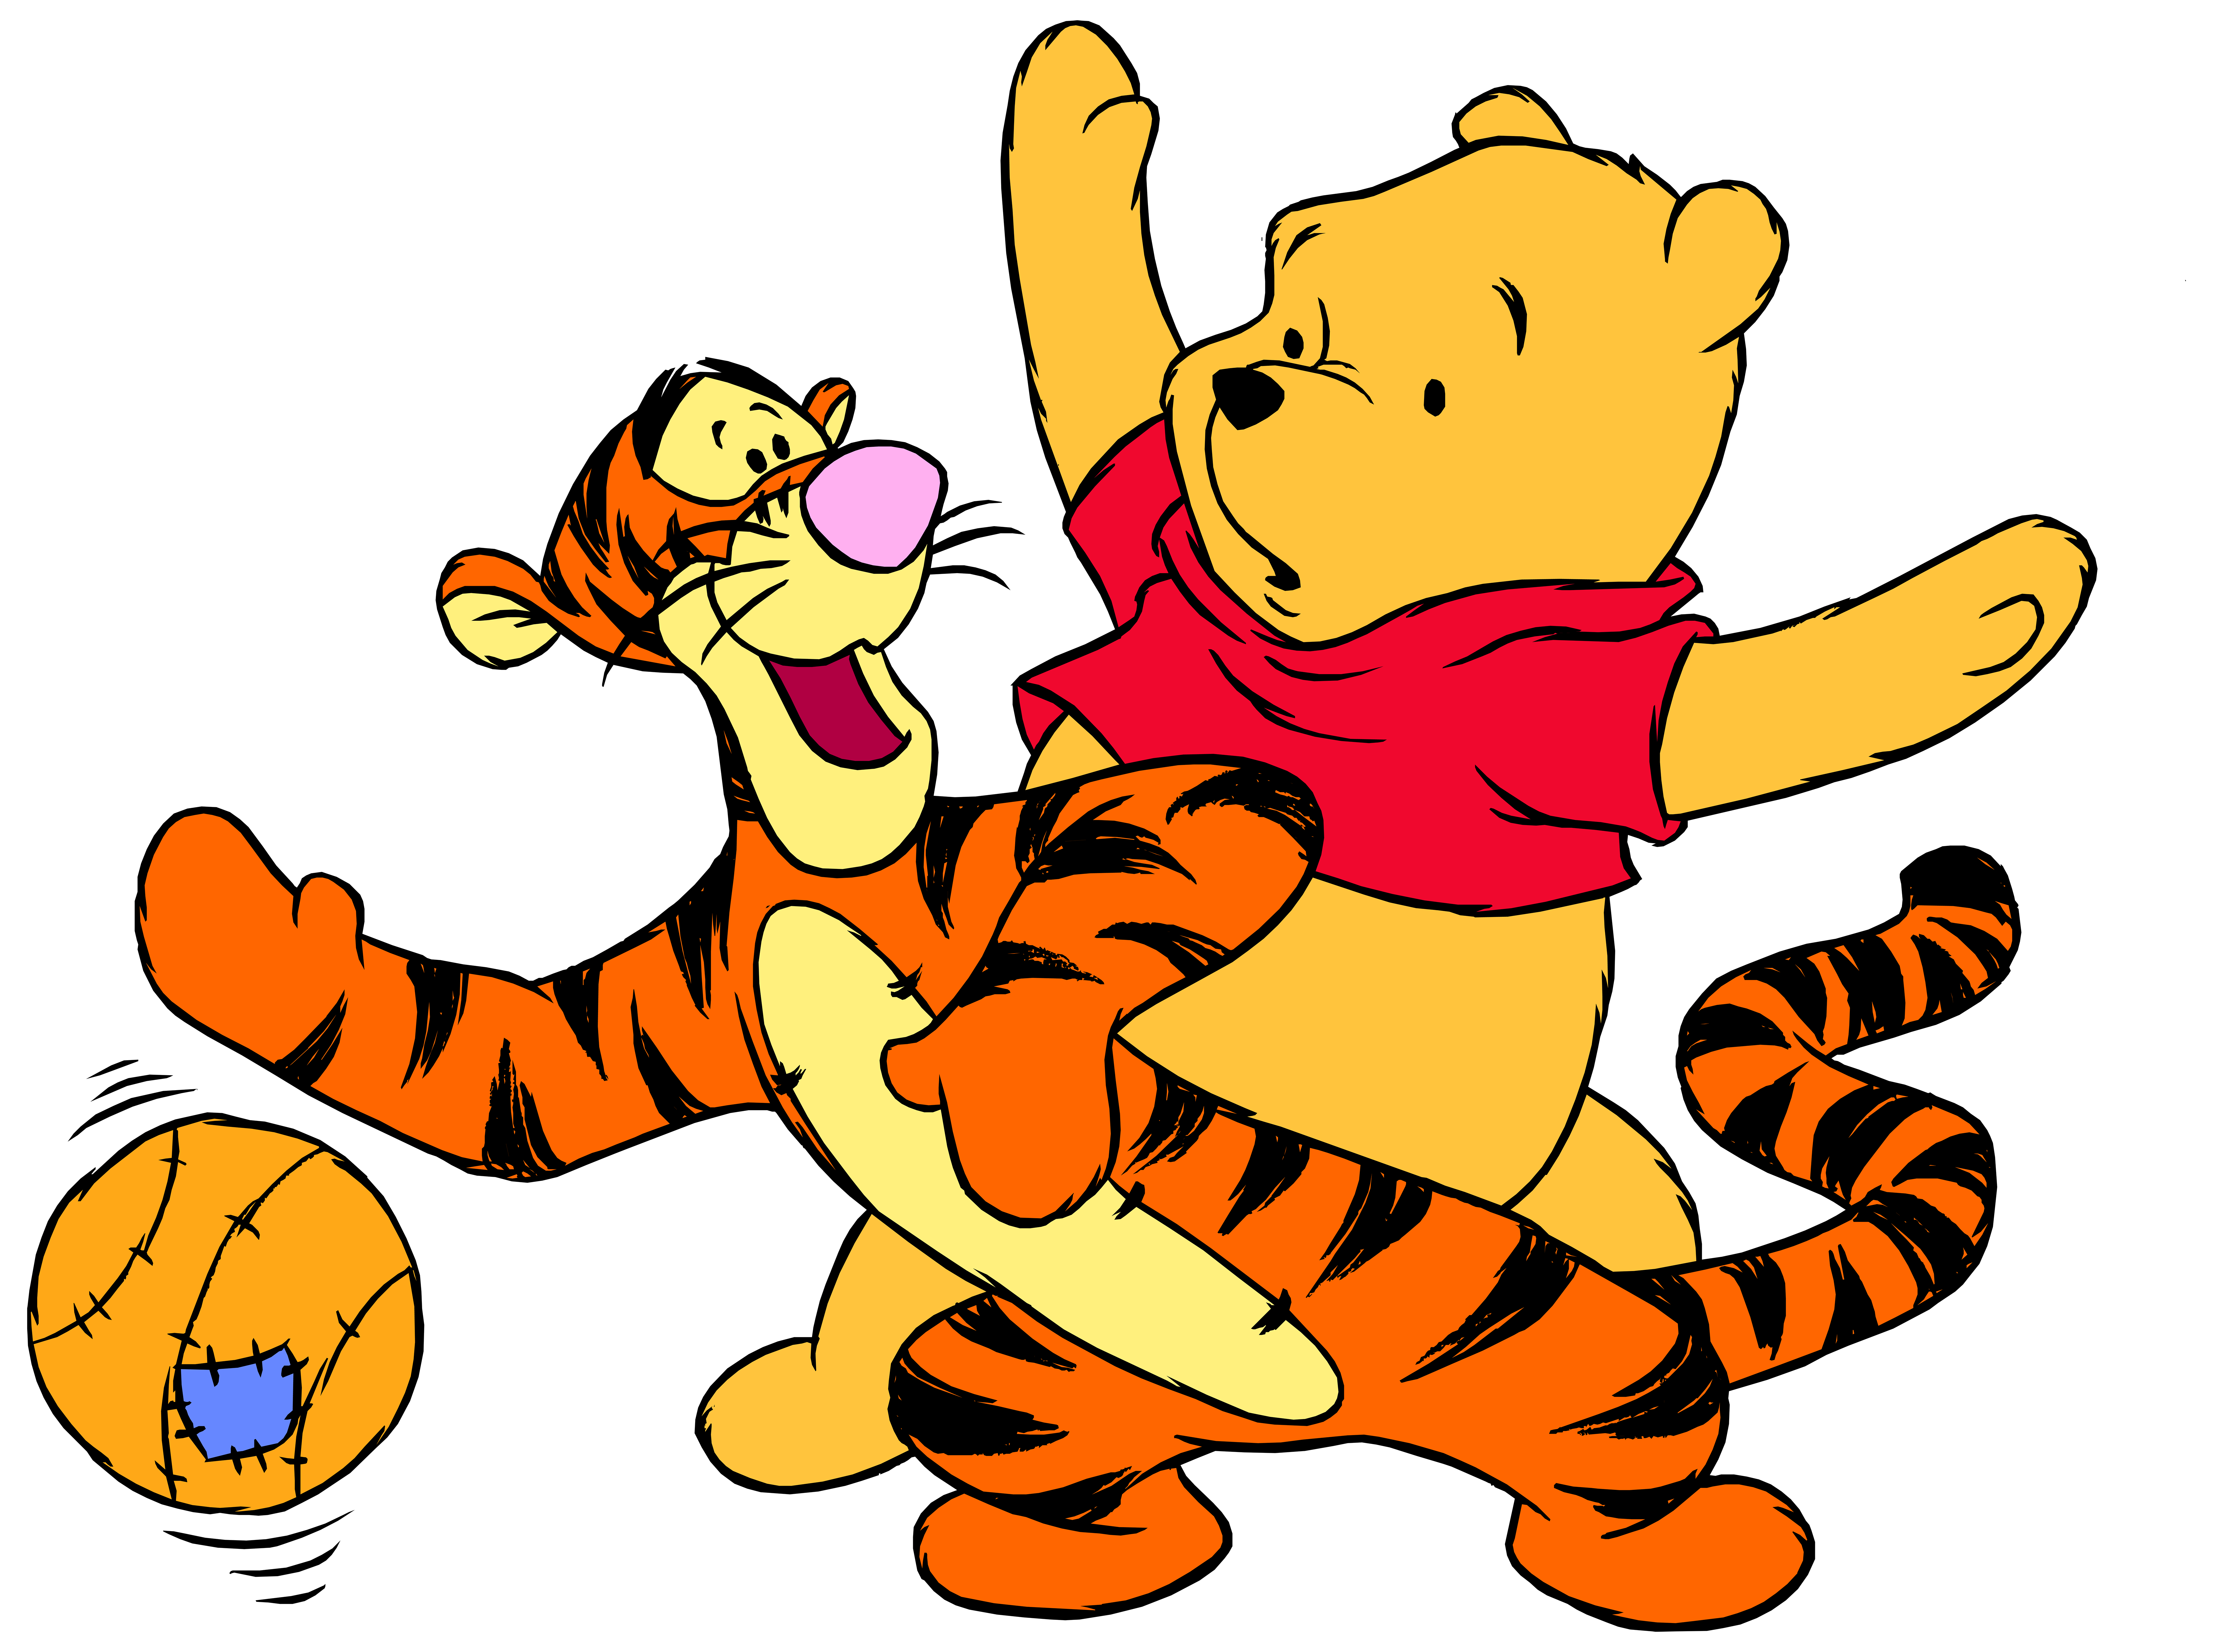 winnie the pooh playing football with tiger png image download #17494